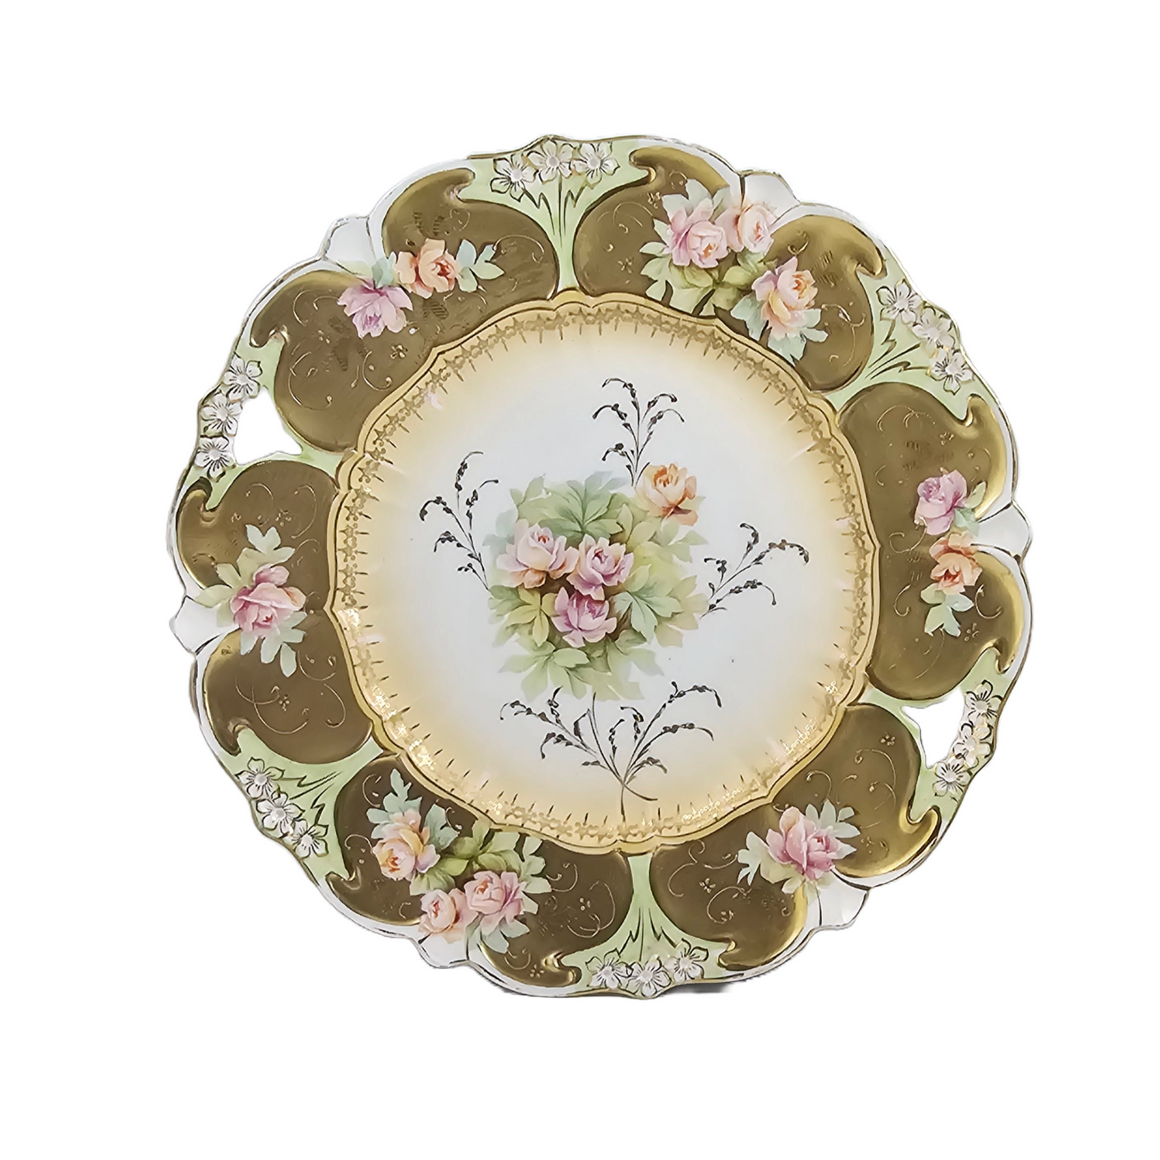 RS Prussia Porcelain Cake Plate Heavy Gold with Roses Early Mold 10 Art Nouveau Period